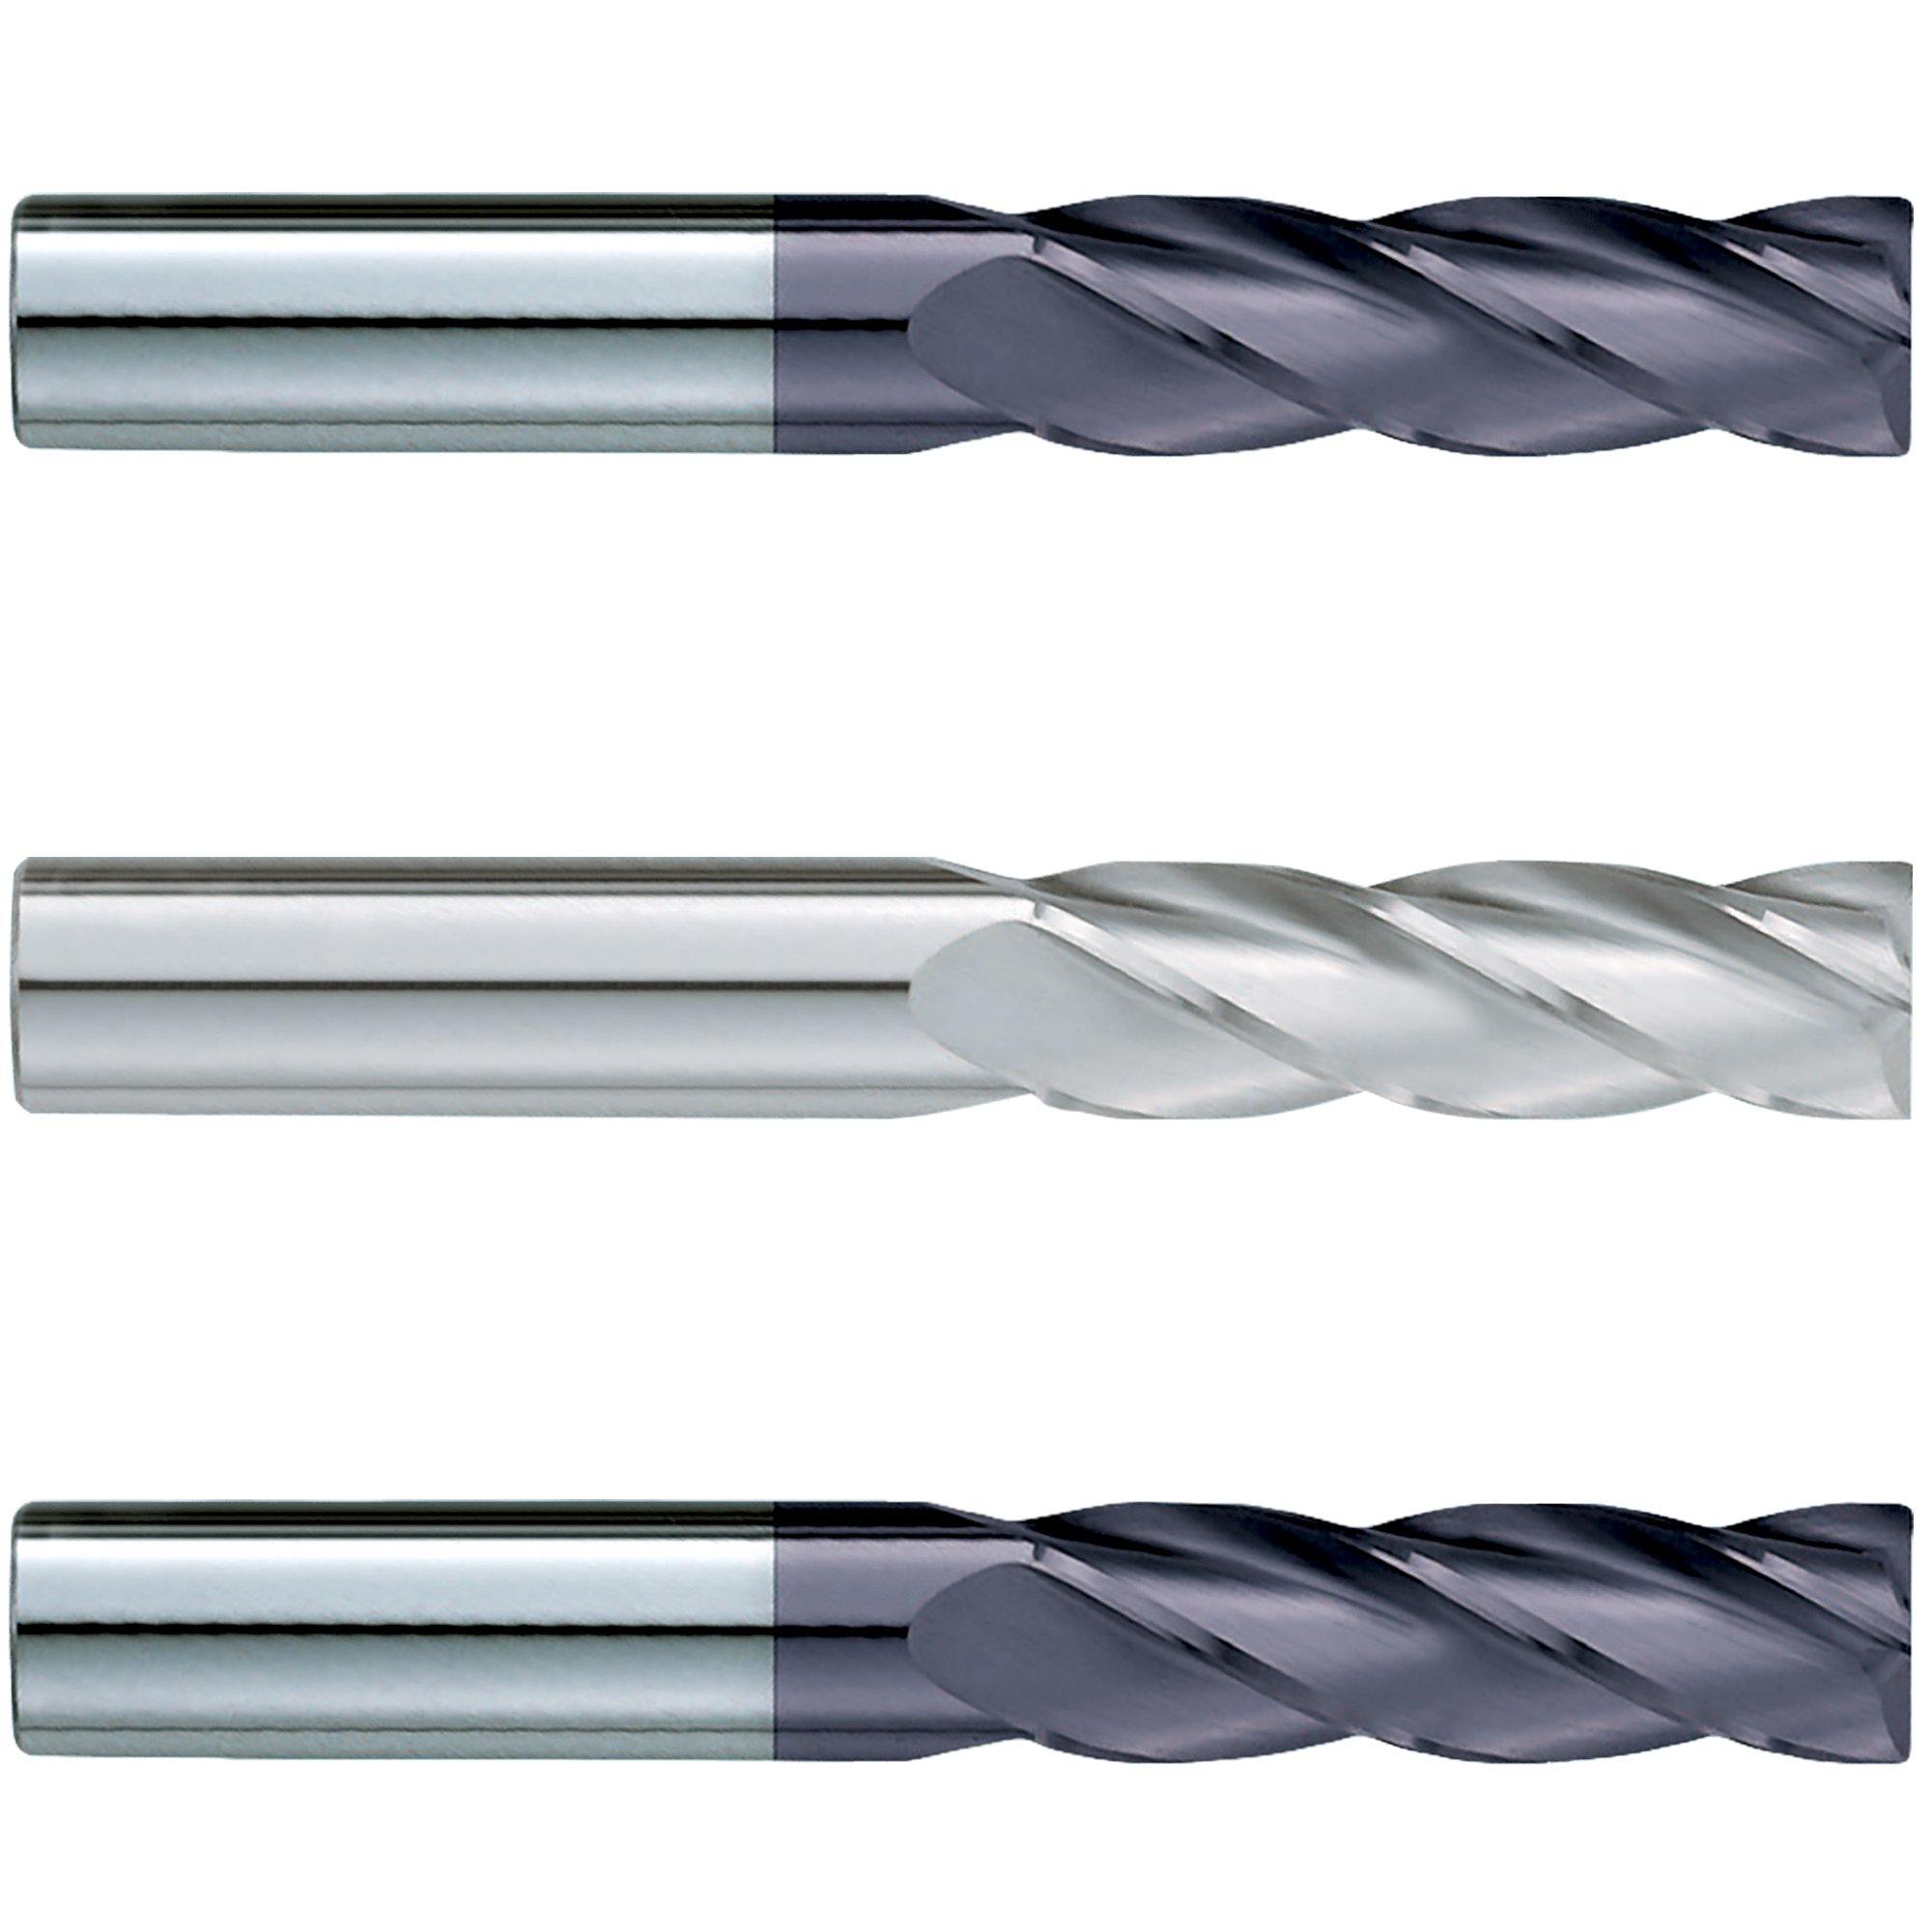 (3 Pack) 1/2" x 3" x 6" Extra Long Square Carbide End Mill - The End Mill Store 